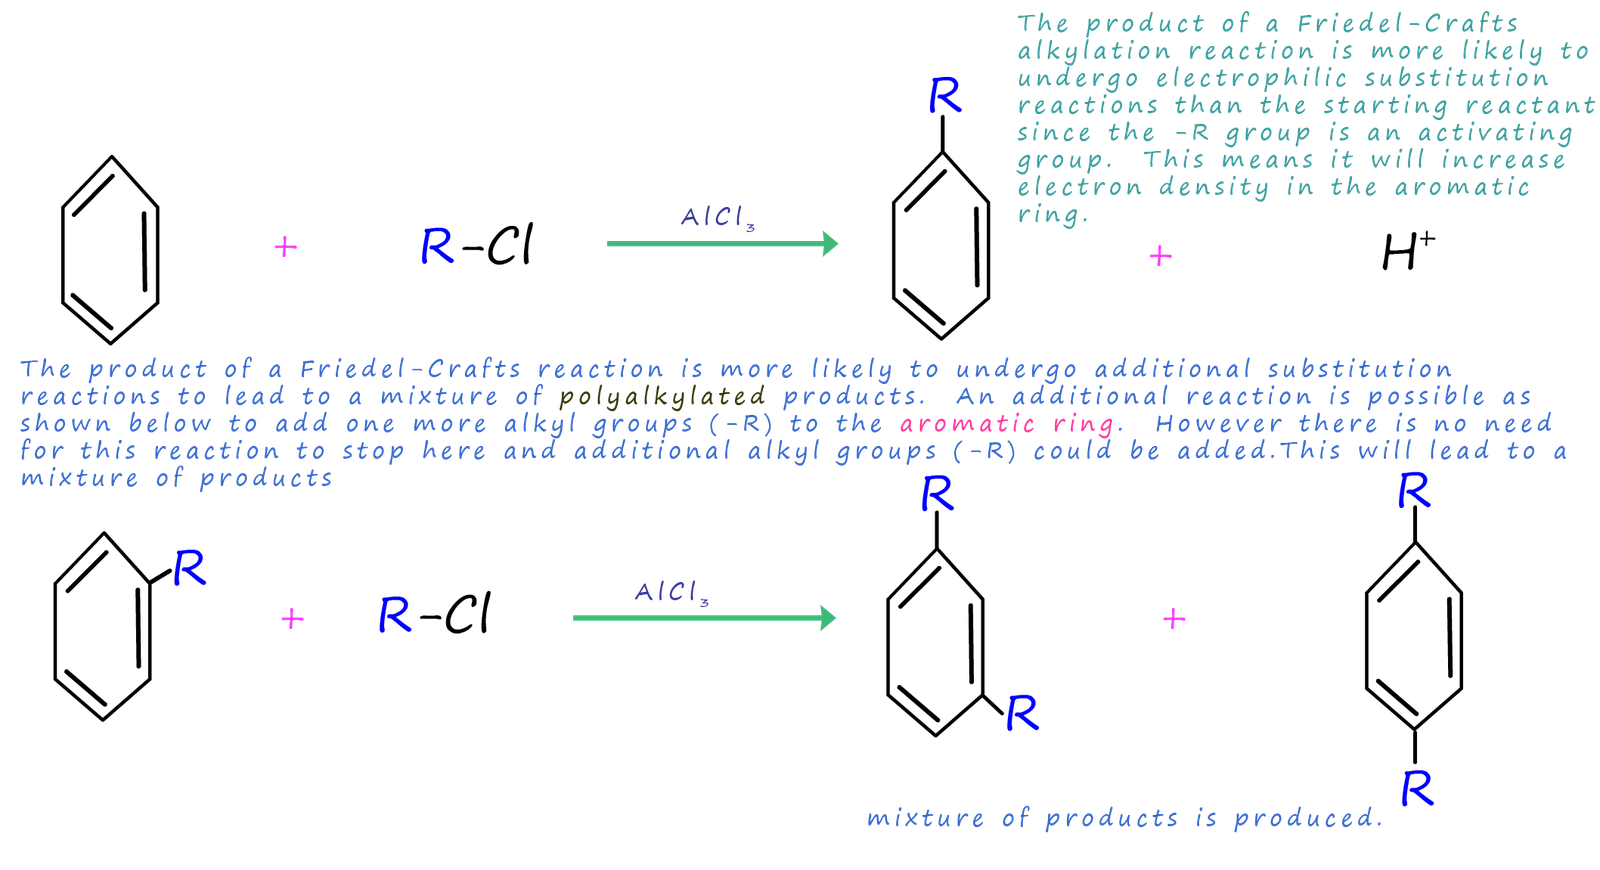 polyalkylation of aromatic rings is a problem 
  with Friedel-Crafts alkylation reactions